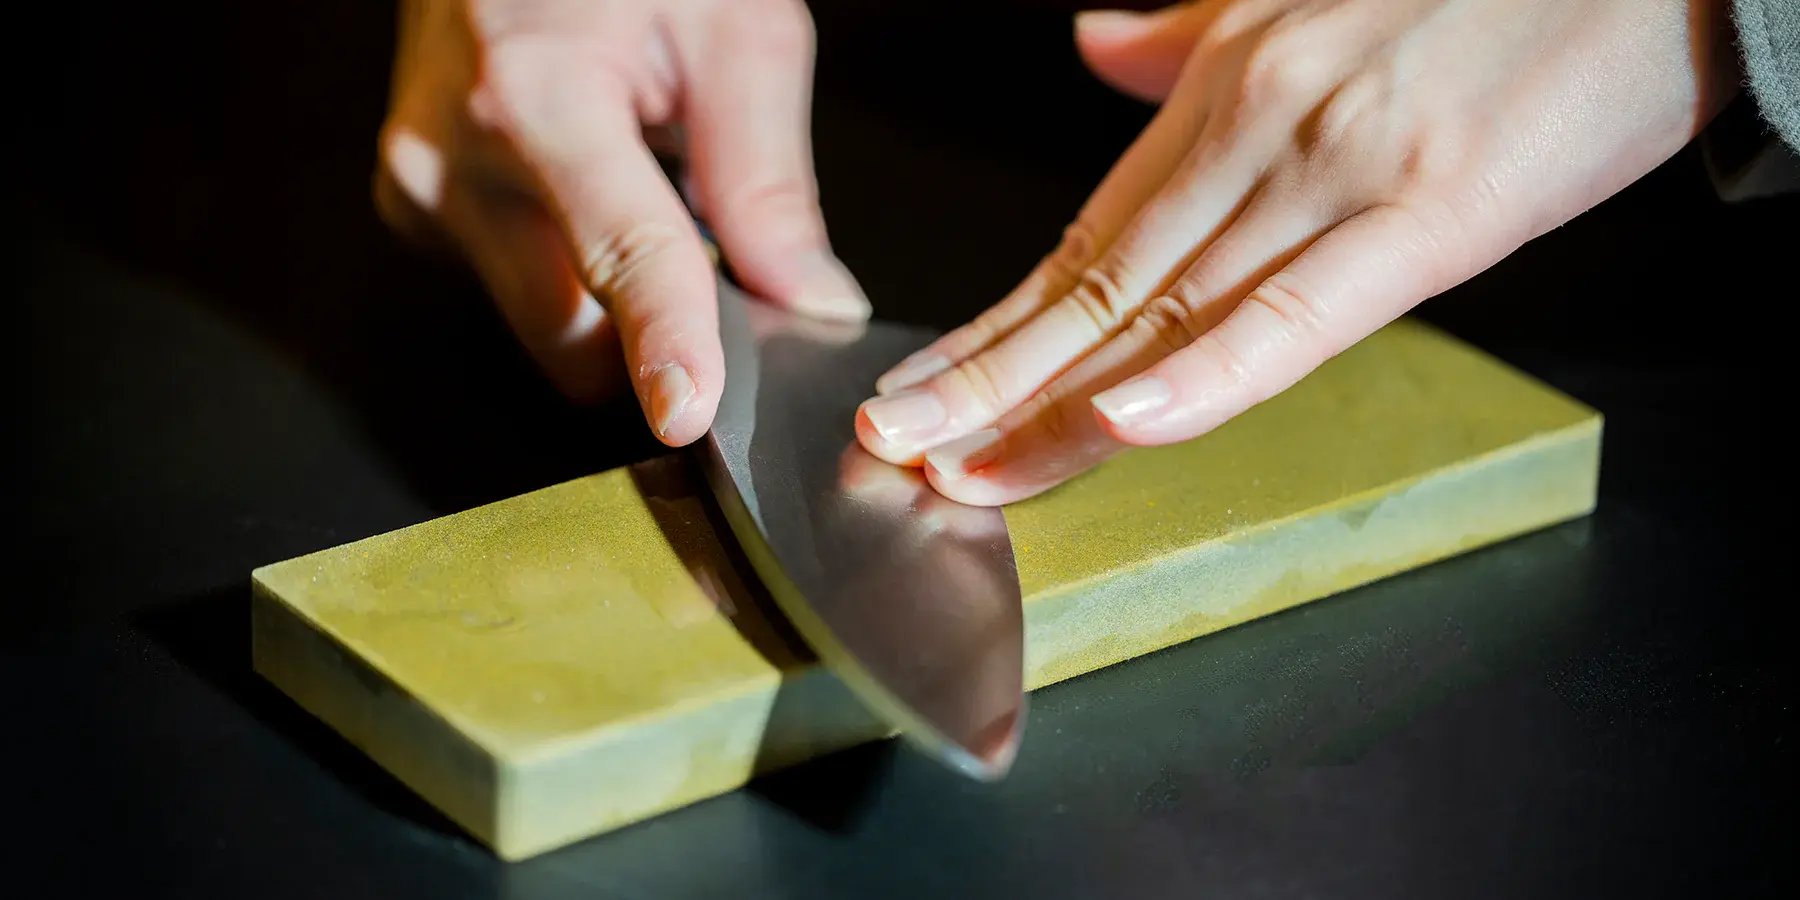 Discover our great selection of Sharpening Stones at Globalkitchen Japan.